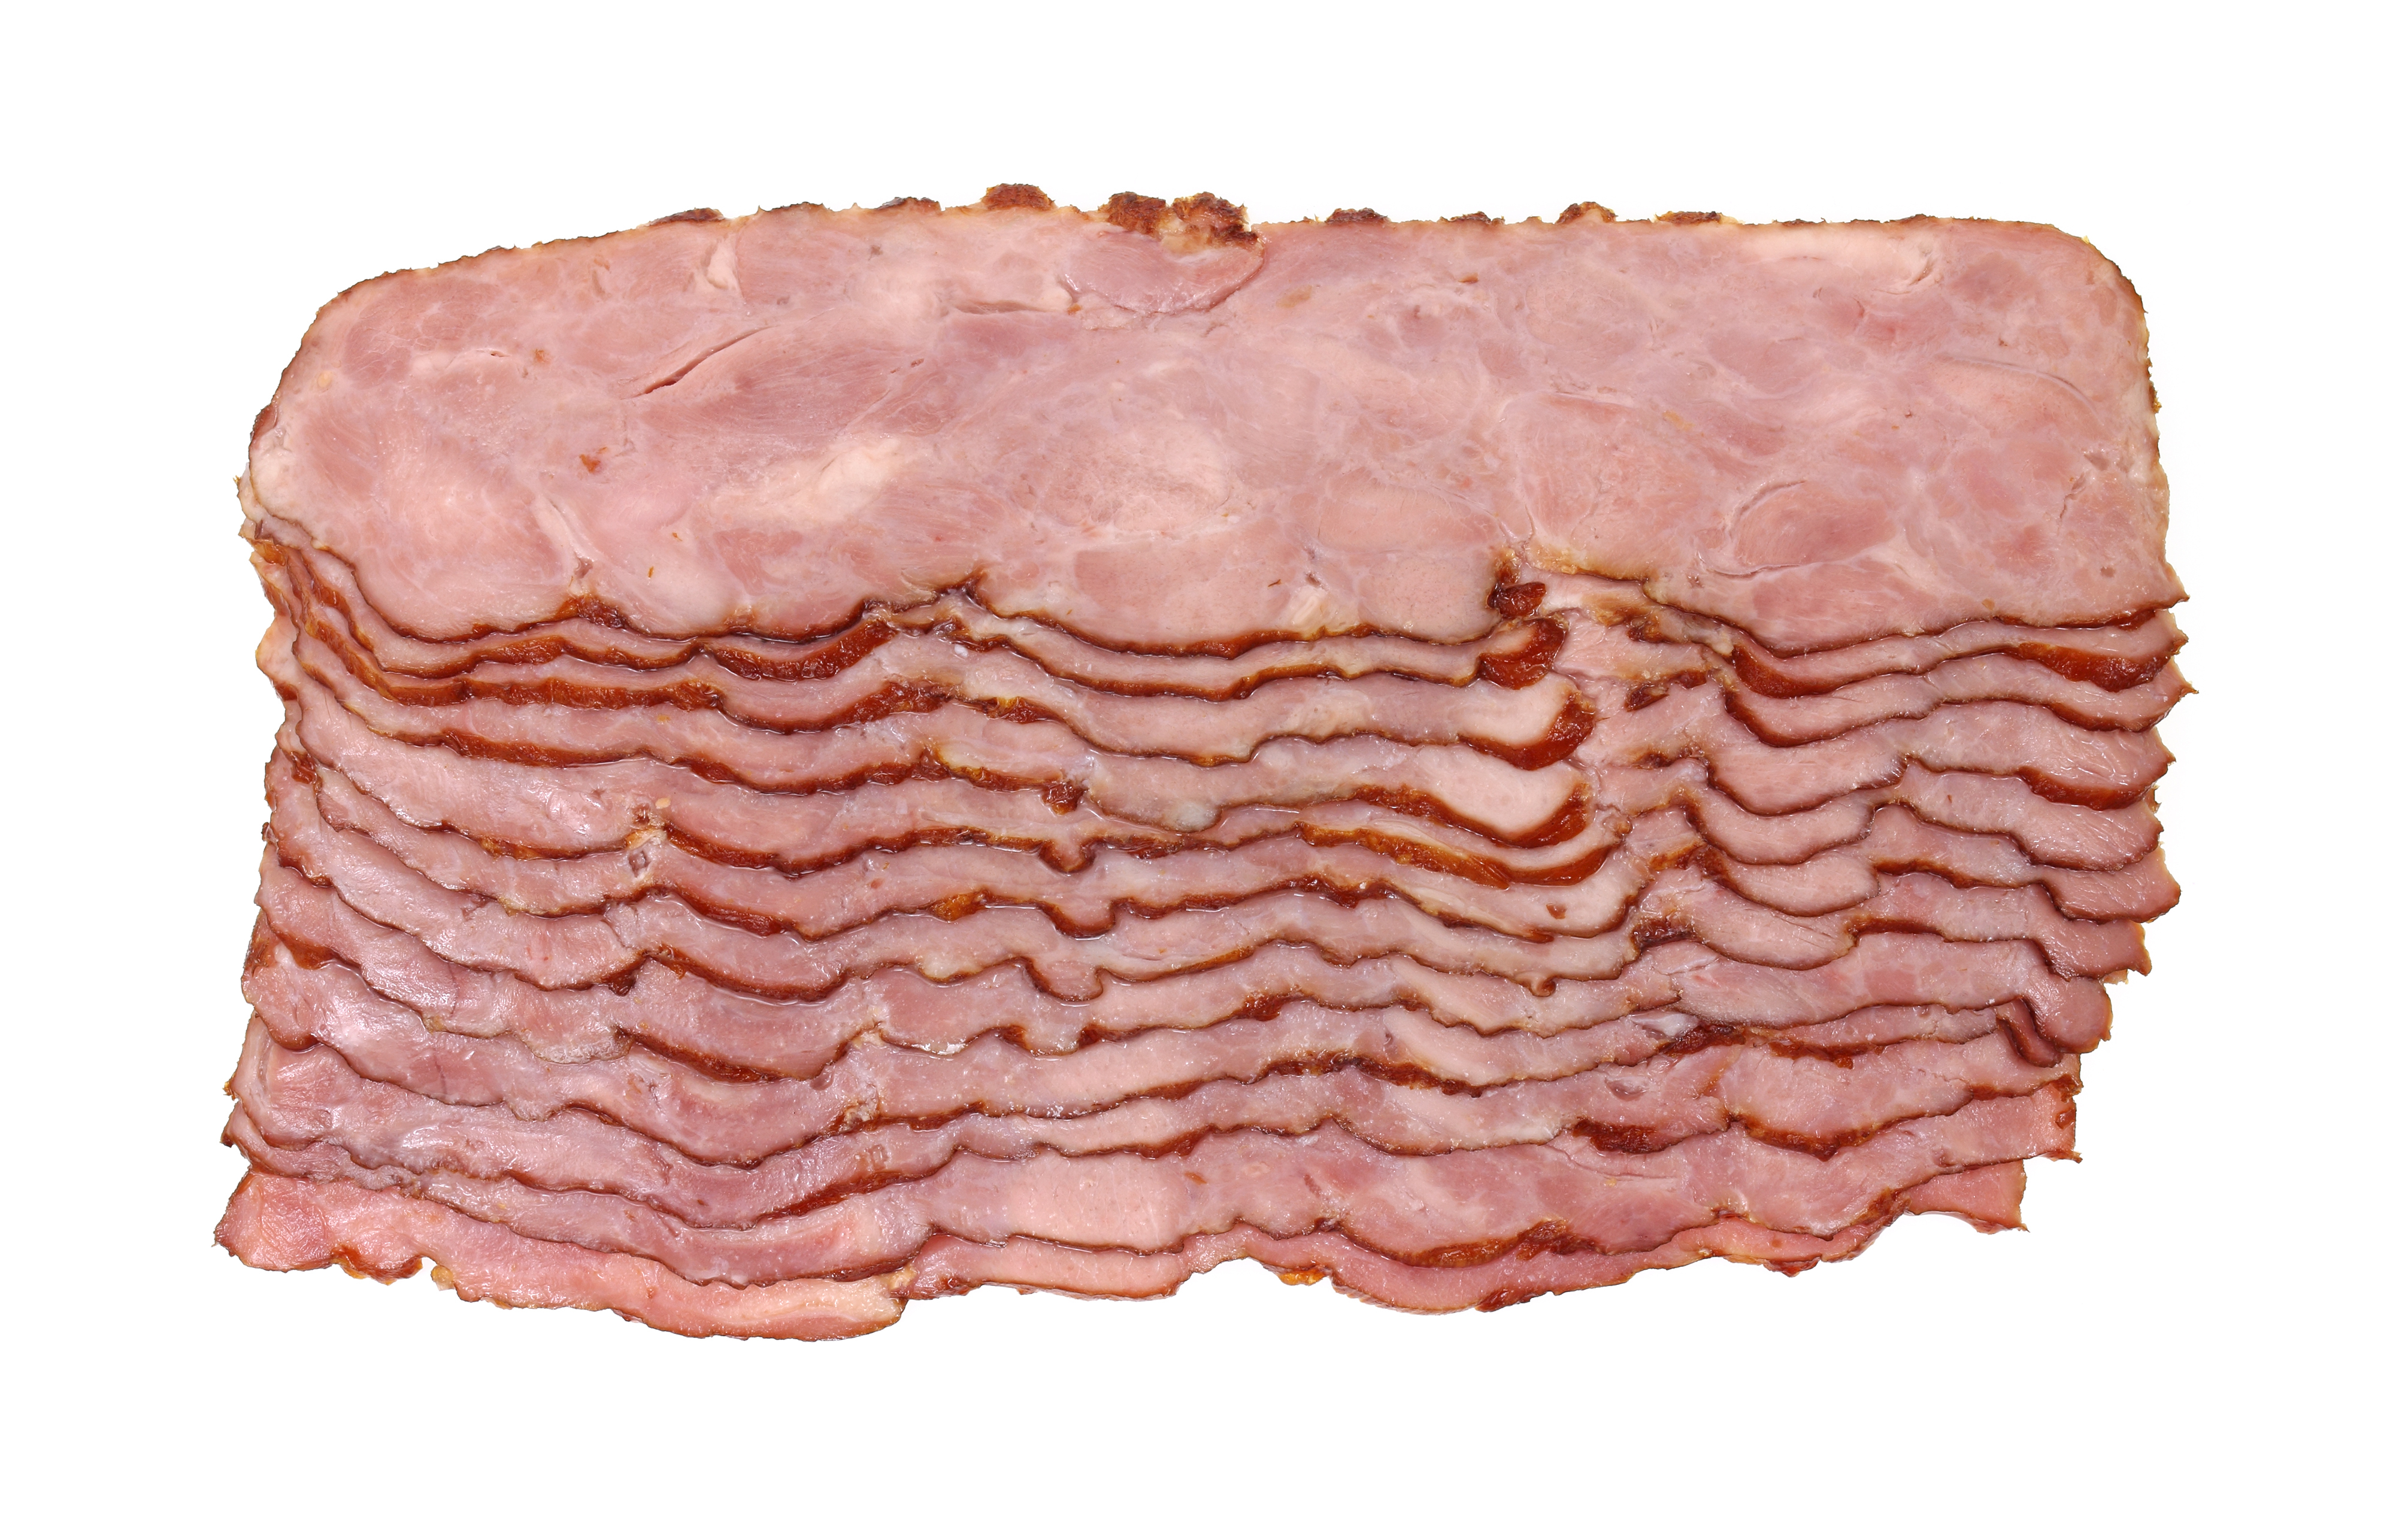 Overhead photo showing shingled slices of raw turkey bacon against a white background.